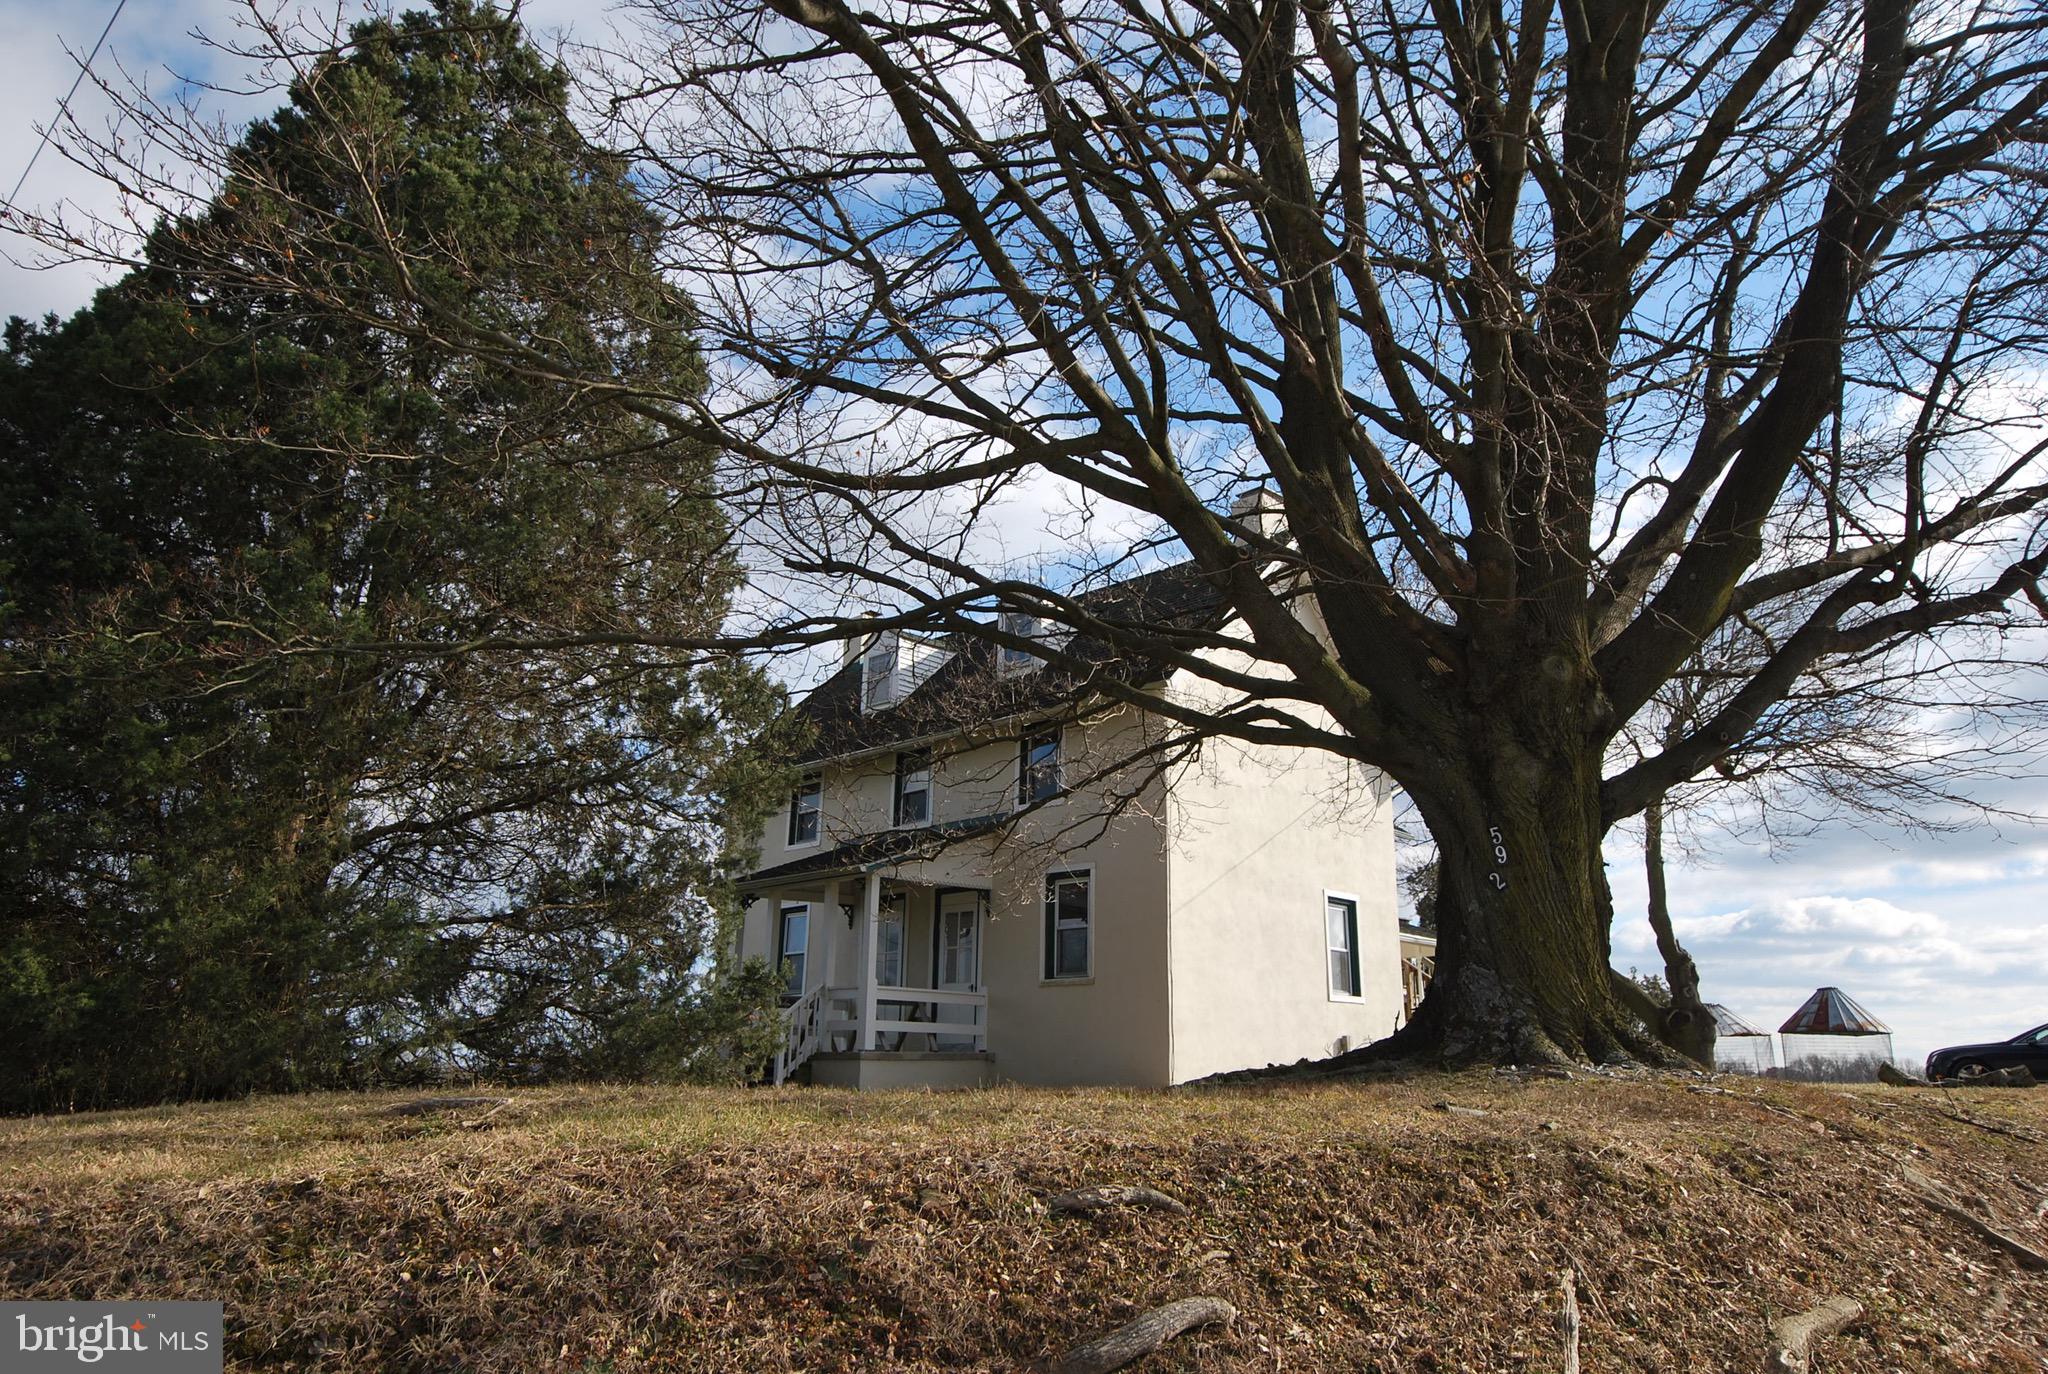 a view of house with a trees